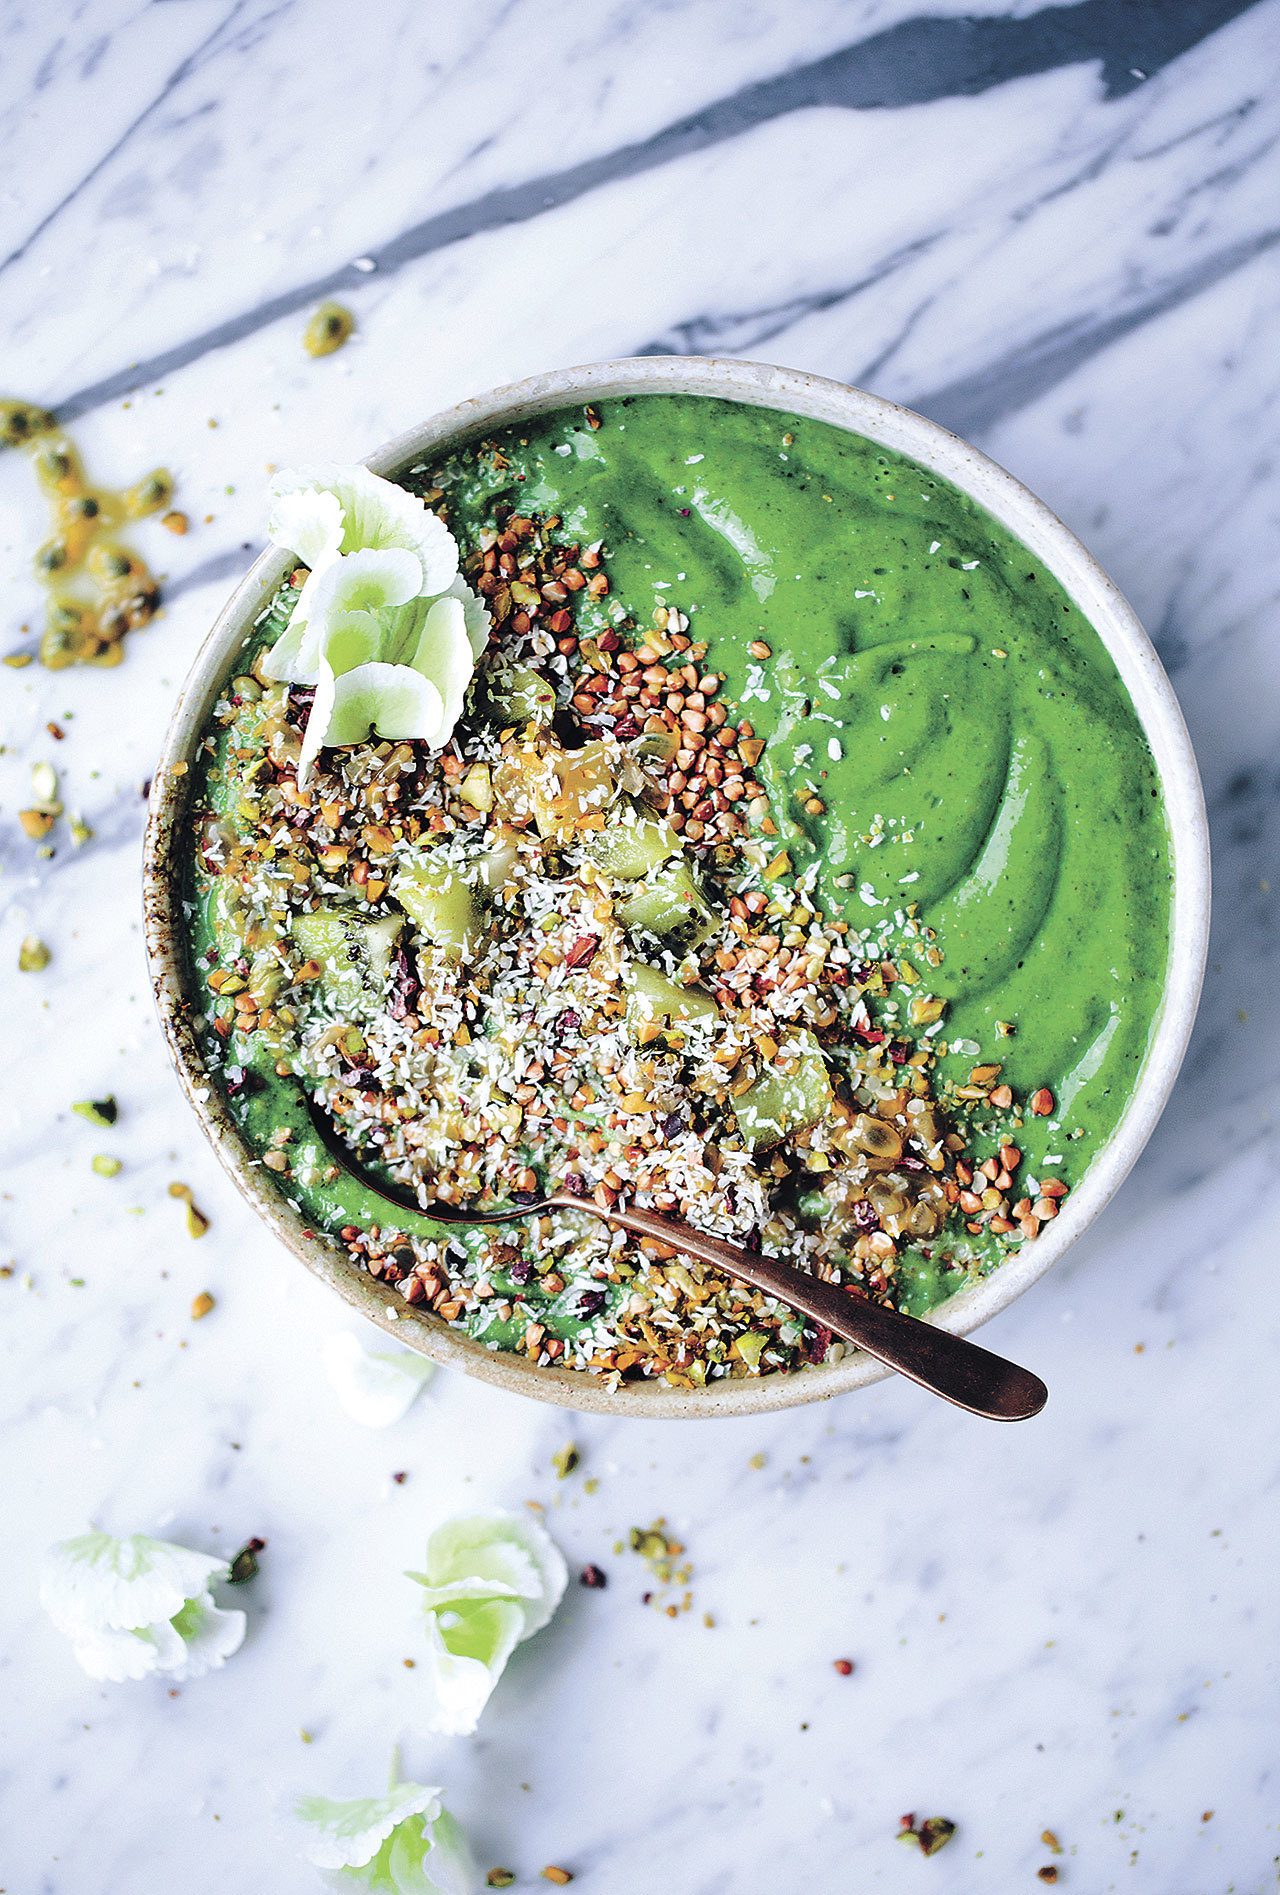 Green Goodness bowl is among the recipes in the book “Green Kitchen Smoothies.”